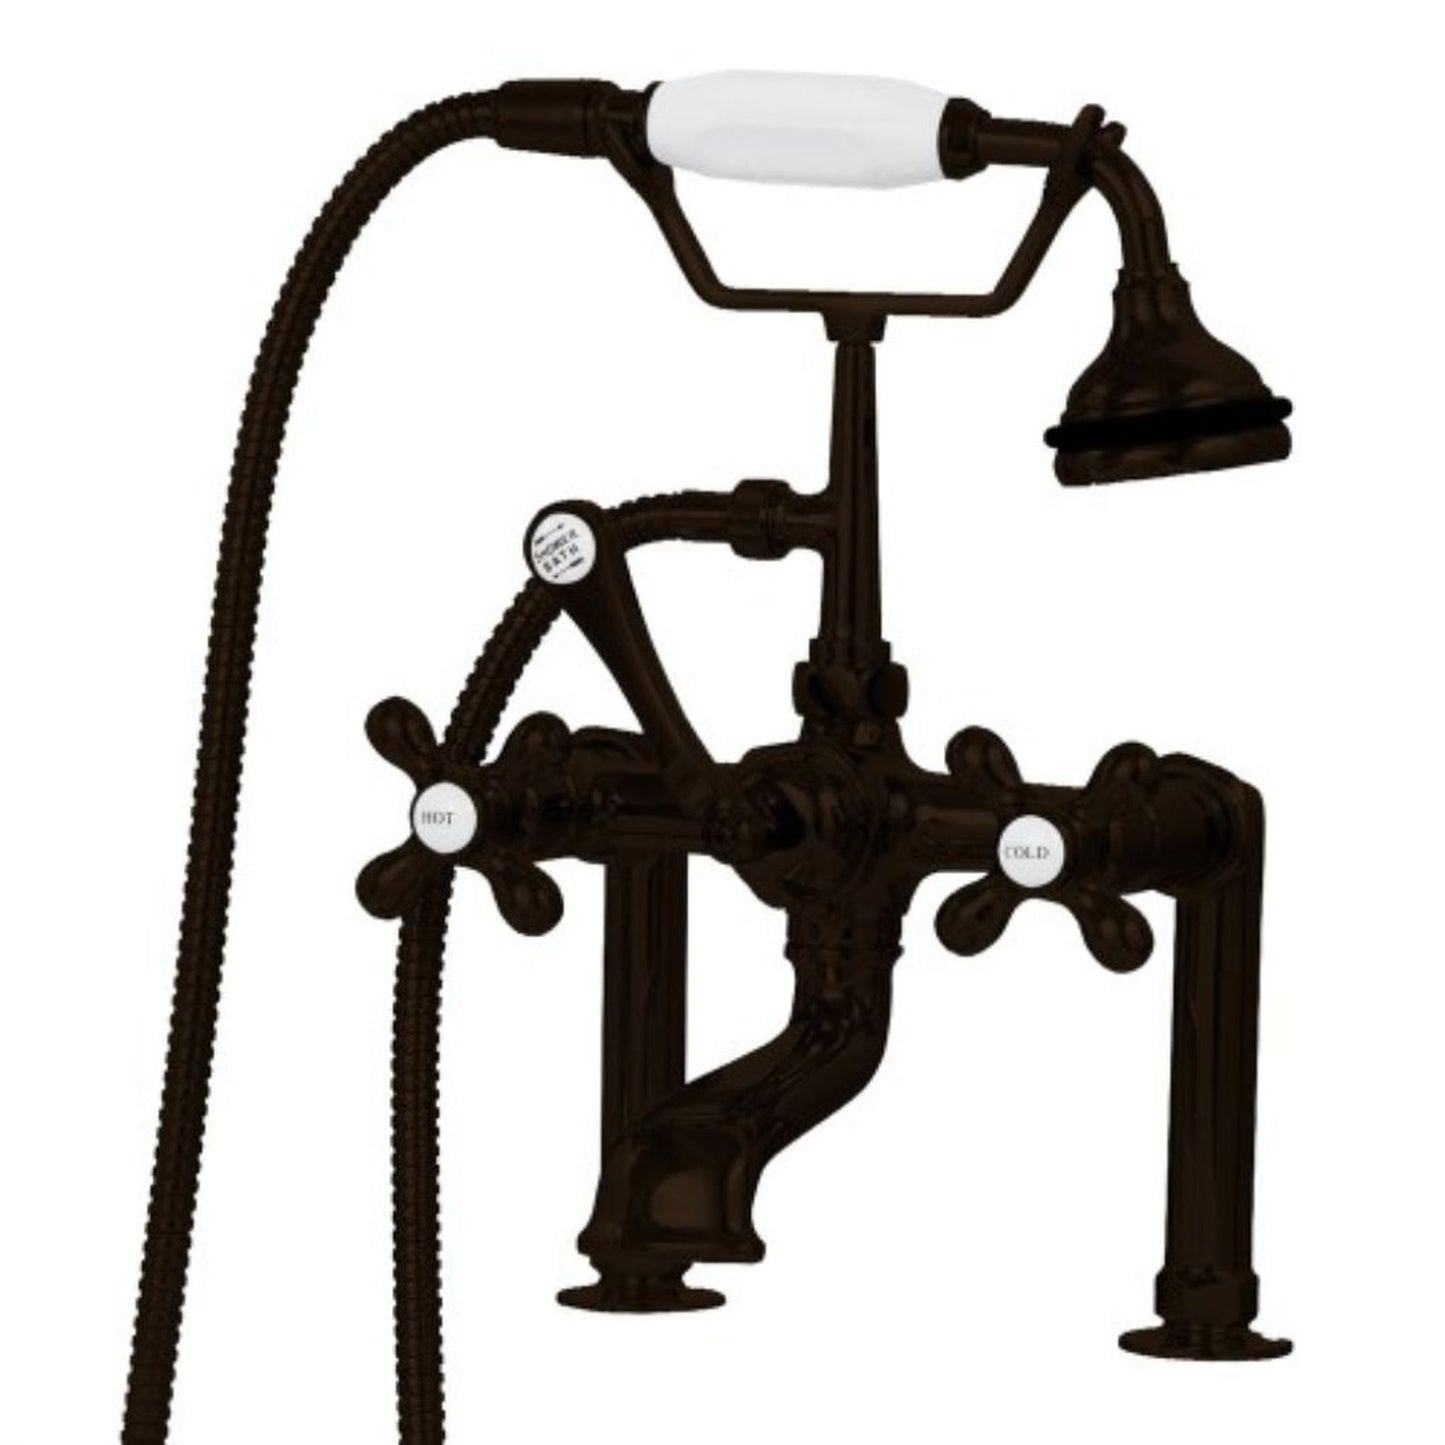 Cambridge Plumbing 6" Risers Oil Rubbed Bronze Deck Mount British Telephone Style Faucet With Hand Held Shower